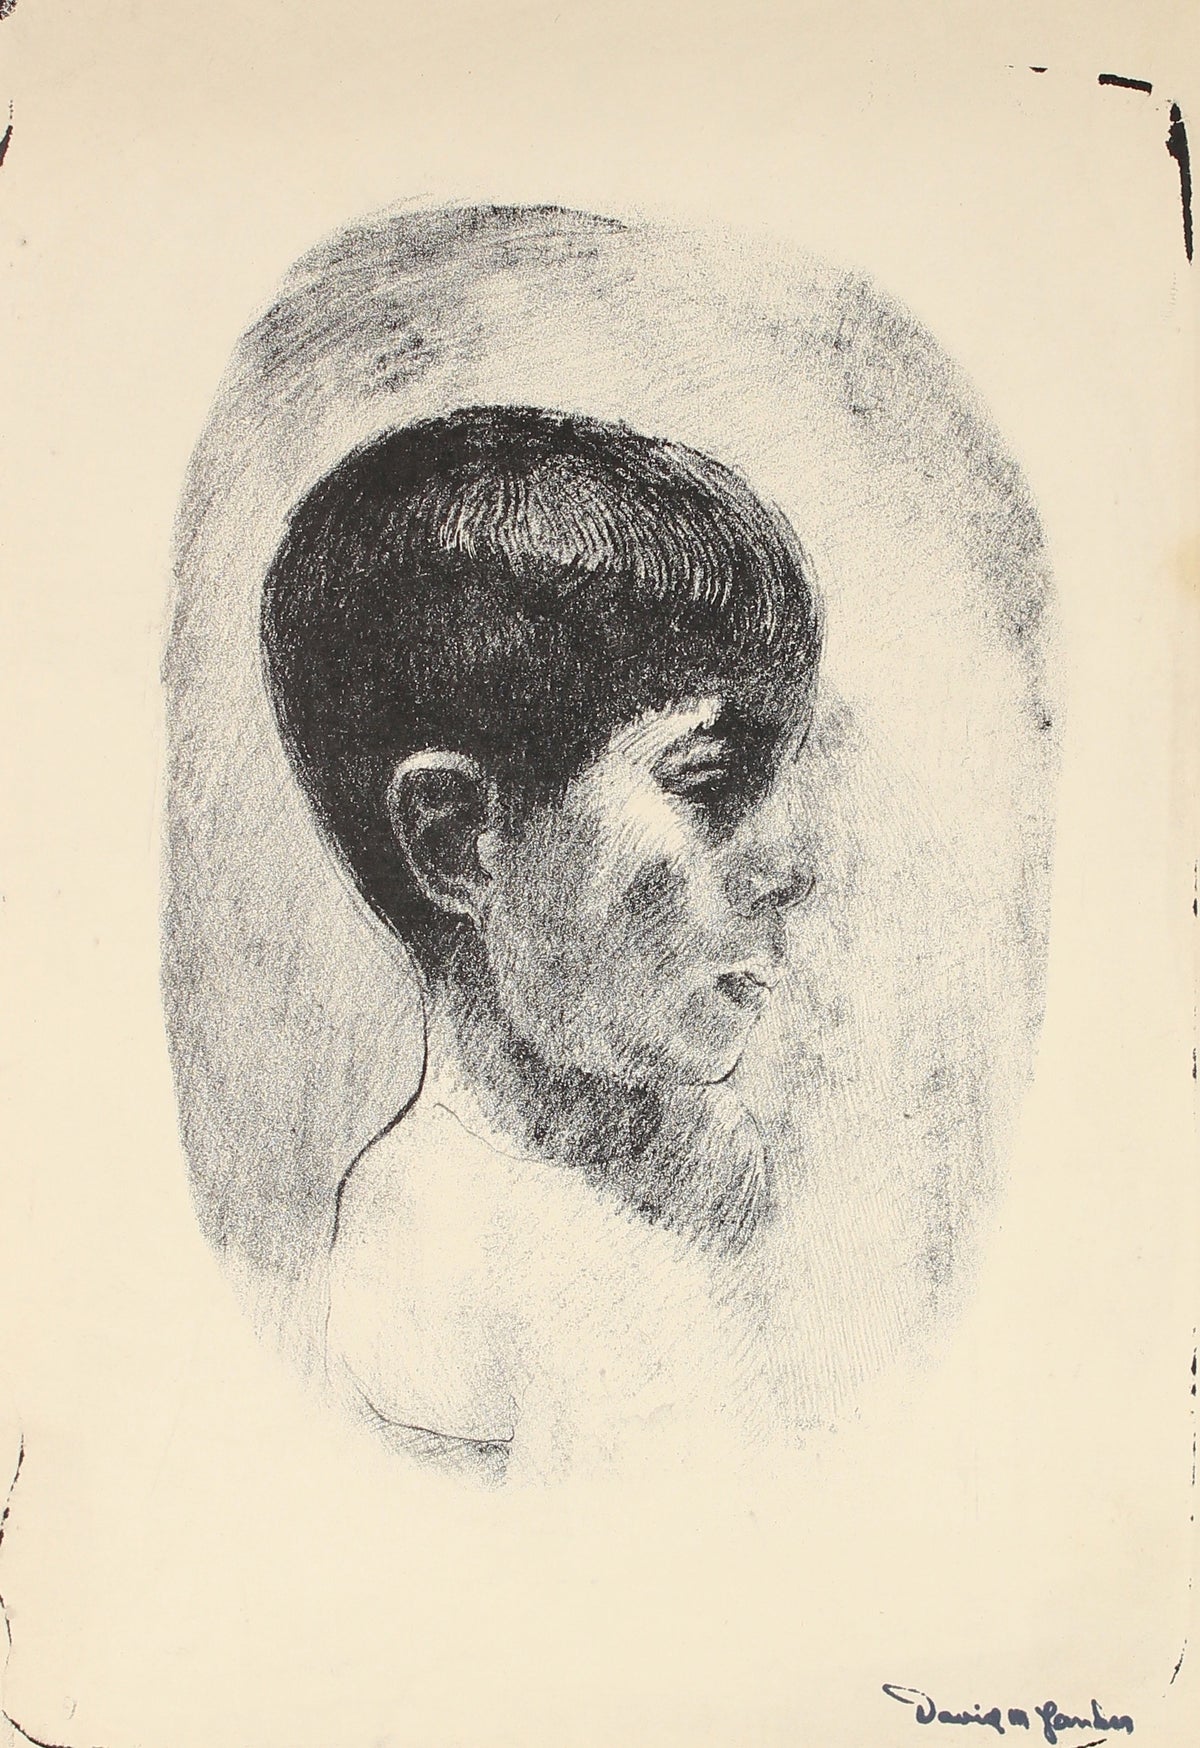 Stone Lithograph of a Boy&lt;br&gt;Mid Century&lt;br&gt;&lt;br&gt;#82317